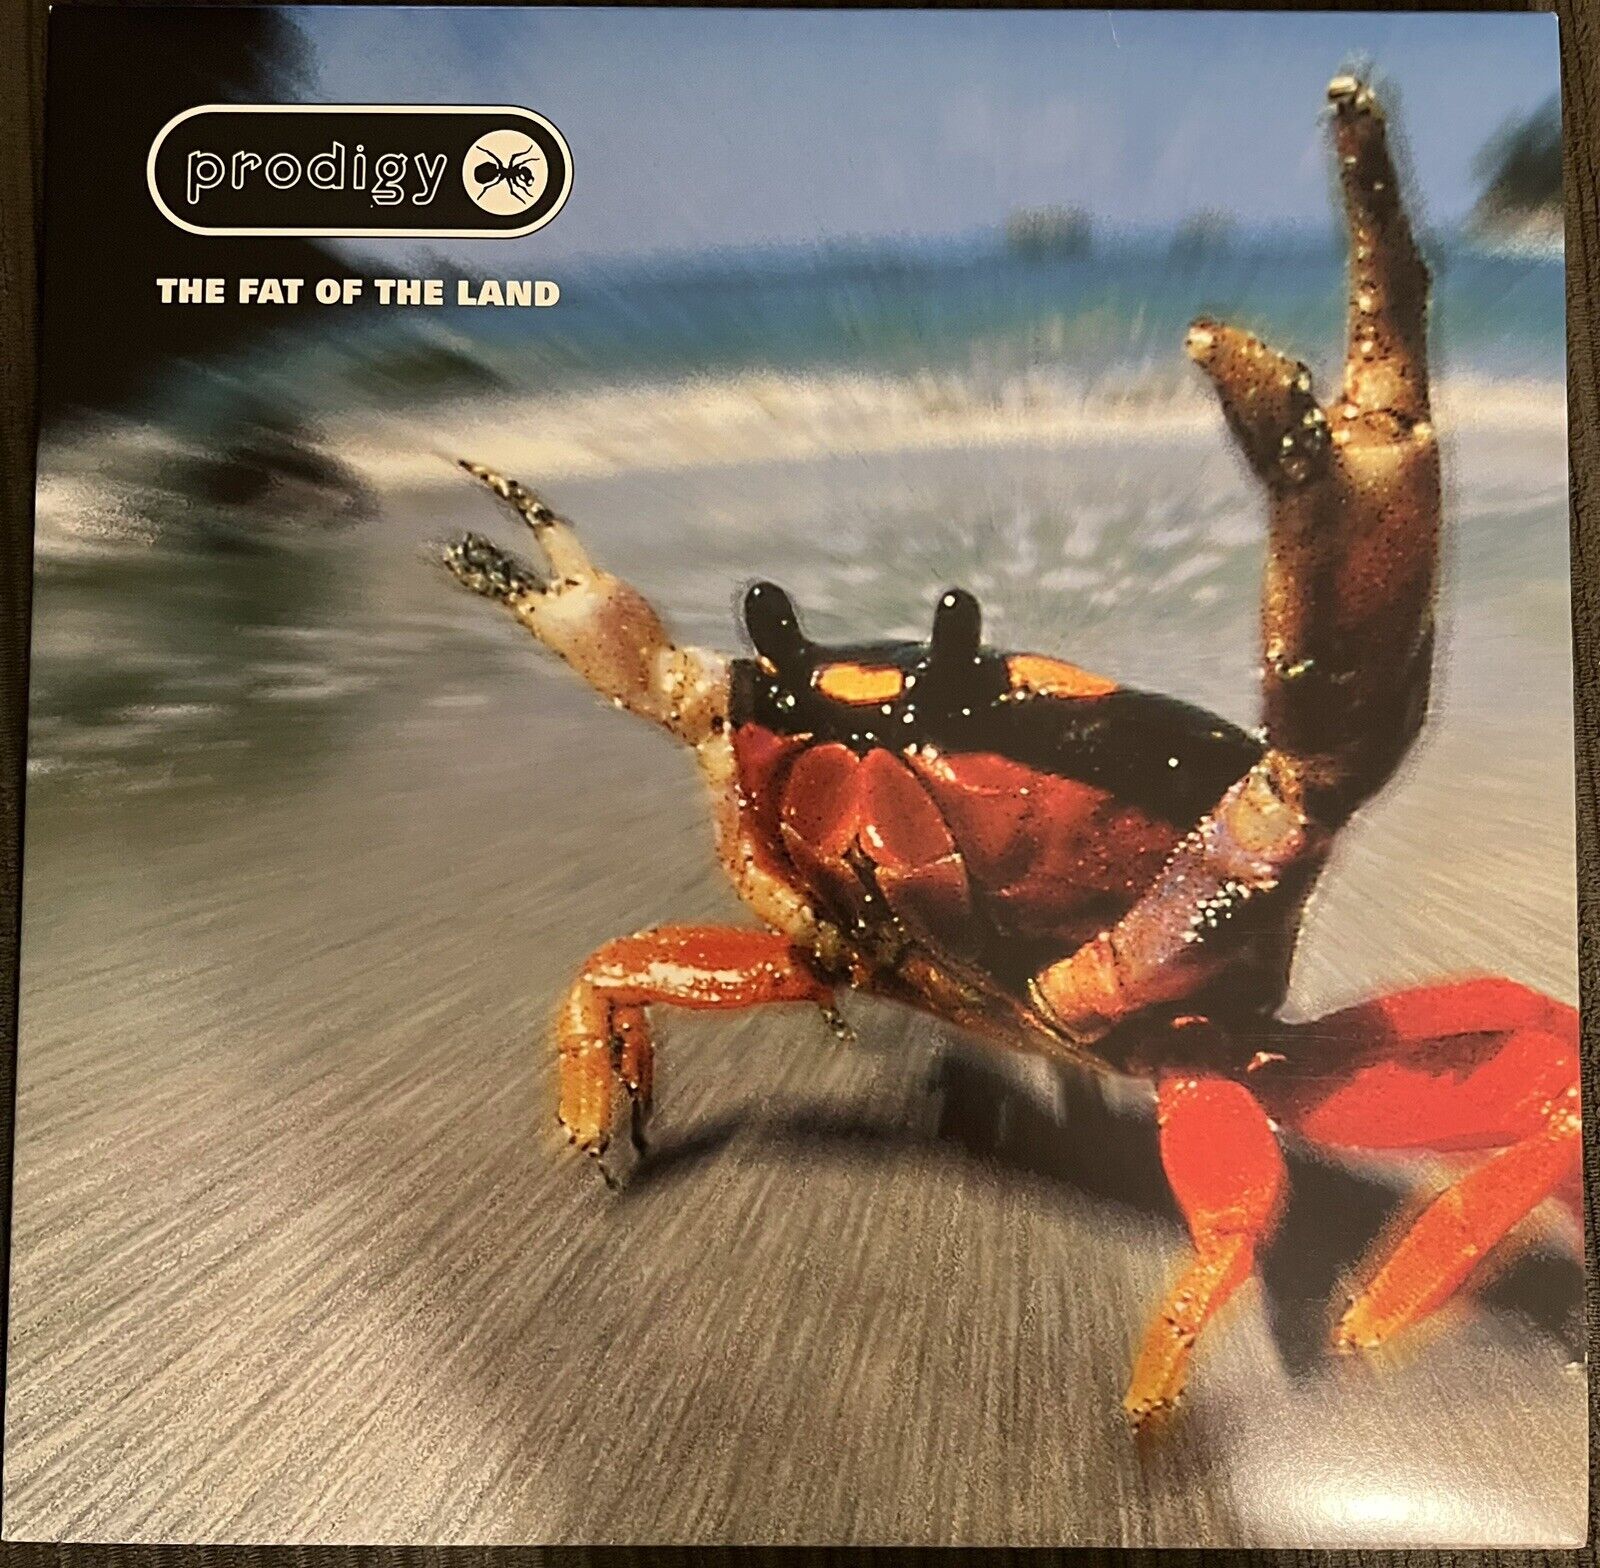 The Fat Of The Land by Prodigy (Record, 2012)